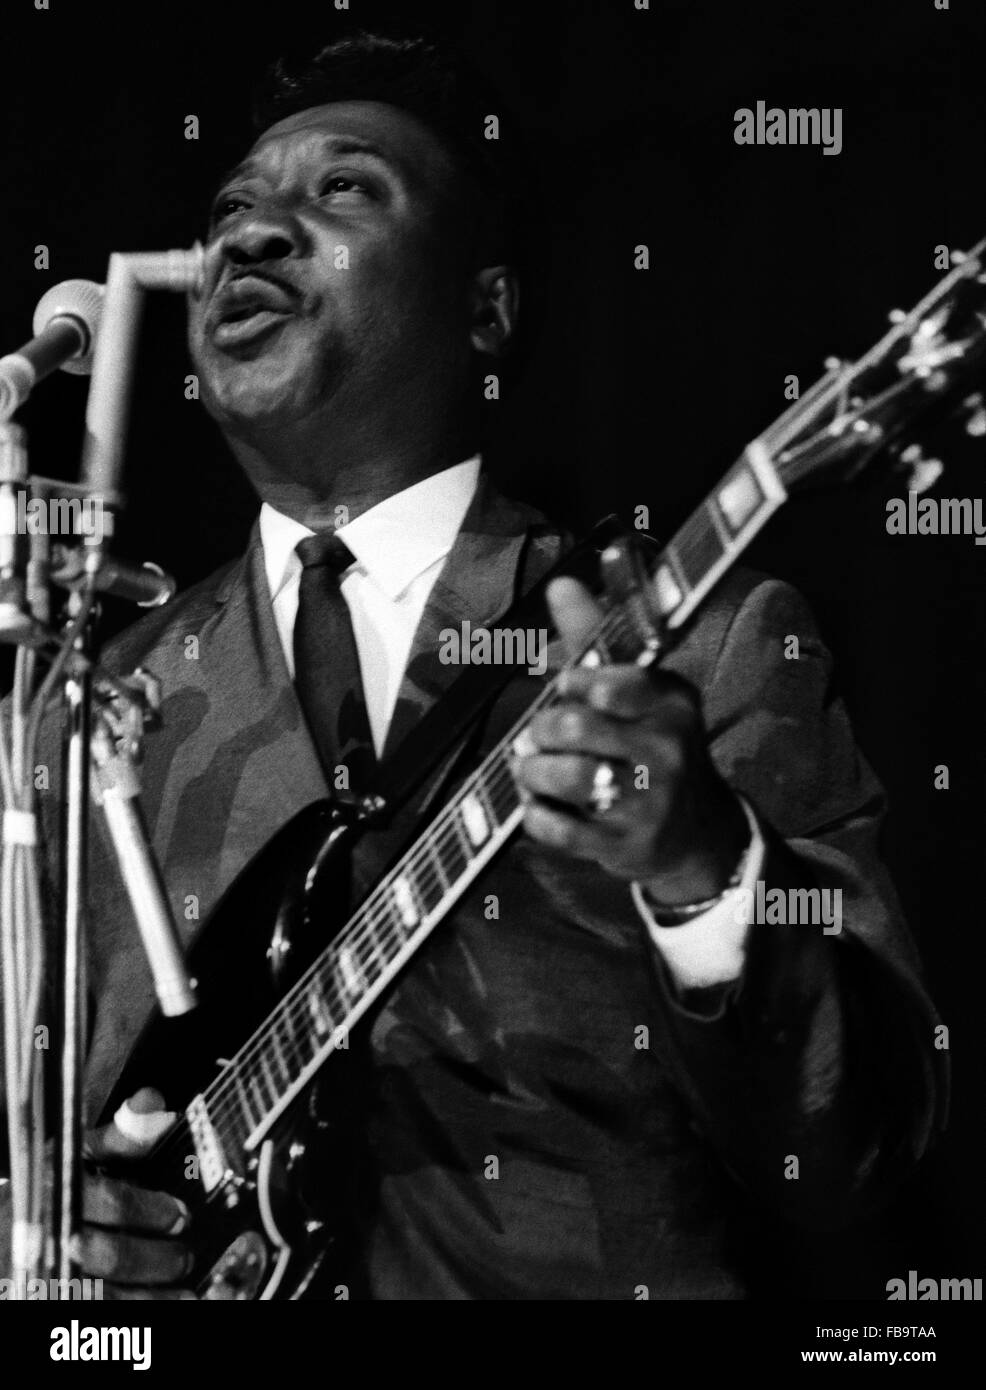 Muddy WATERS (American blues musician, generally considered the 'father of modern Chicago blues') -    -  Muddy WATERS (American blues musician, generally considered the 'father of modern Chicago blues') -  Muddy WATERS on-stage.   -  Philippe Gras / Le Pictorium Stock Photo